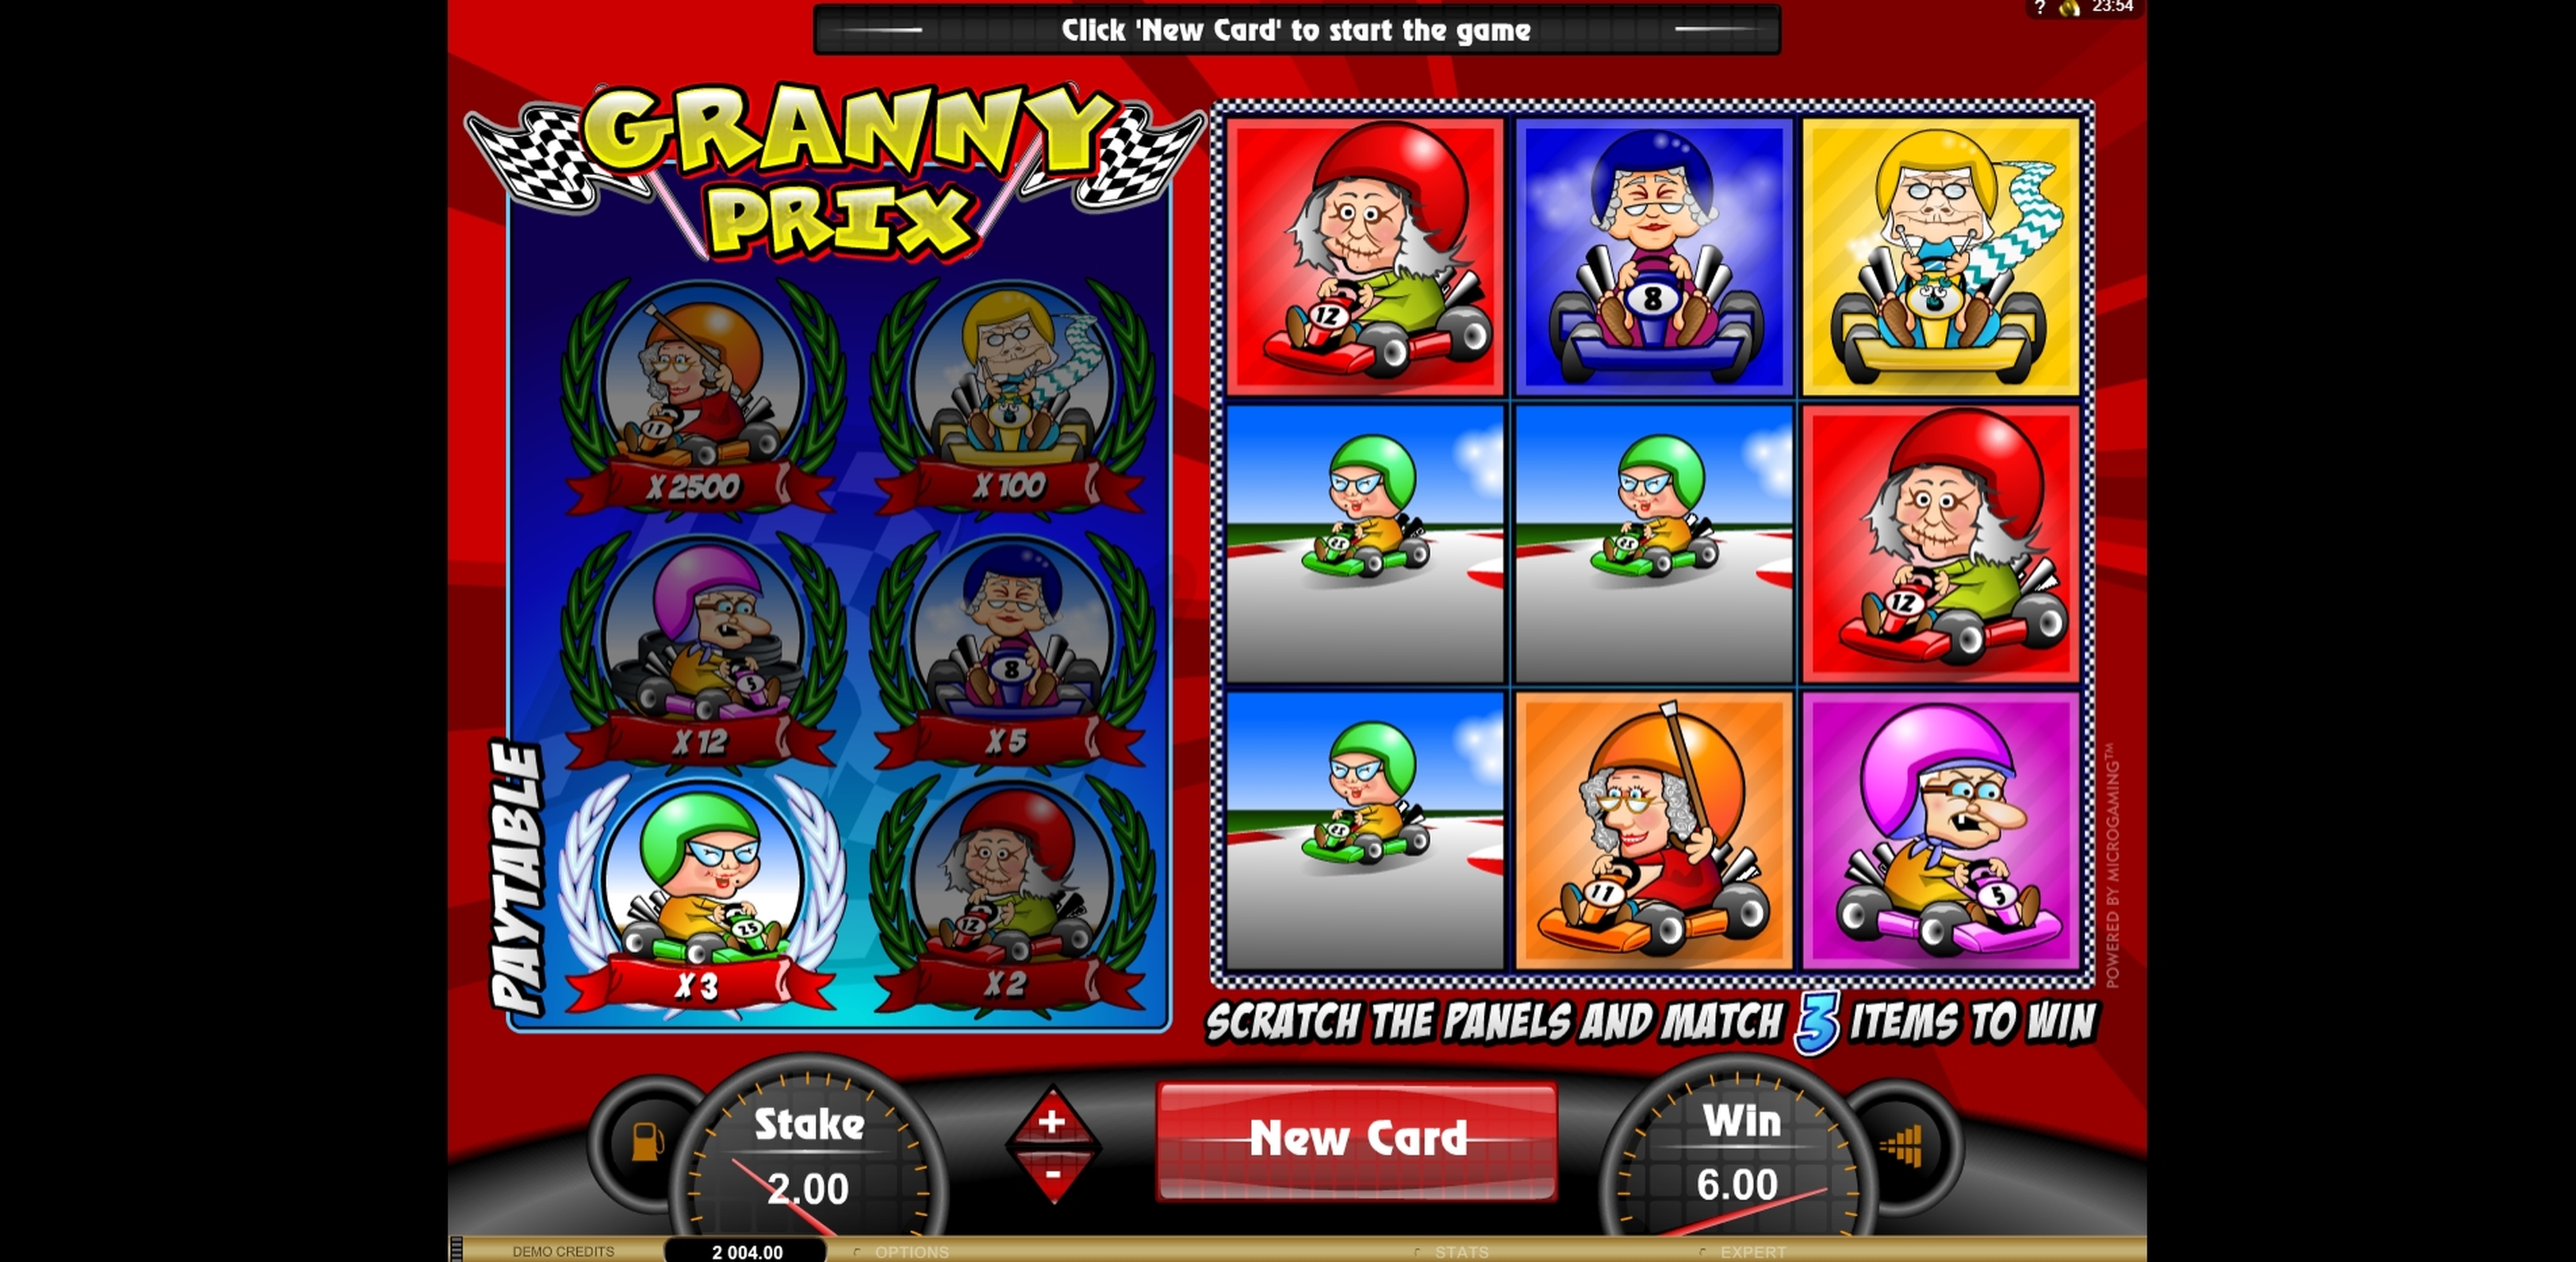 Win Money in Granny Prix Free Slot Game by Microgaming